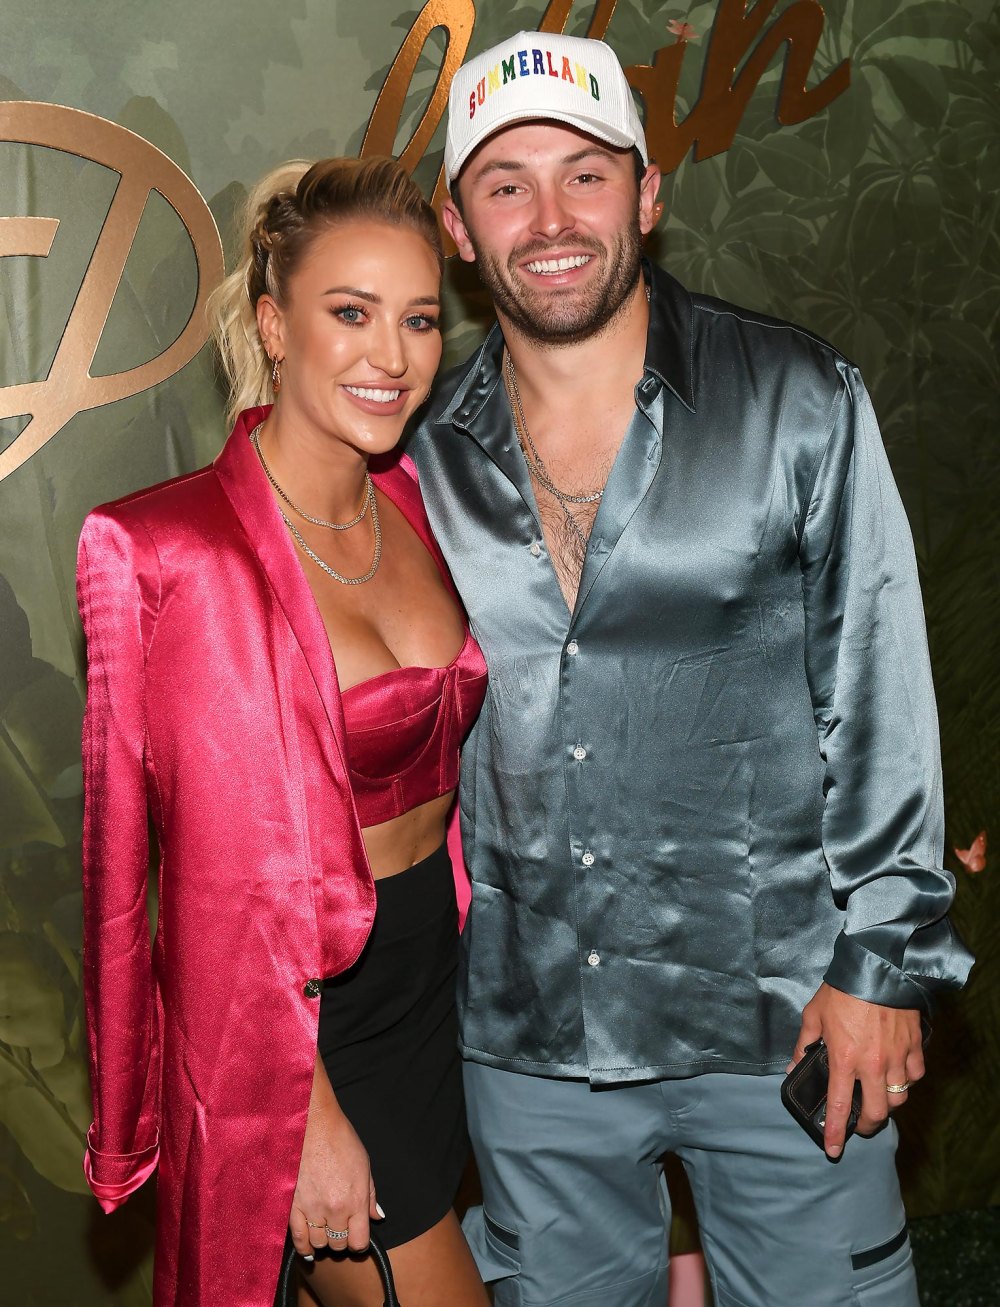 Timeline of the relationship between Tampa Bay Buccaneers 2 quarterback Baker Mayfield and his wife Emily Wilkinson